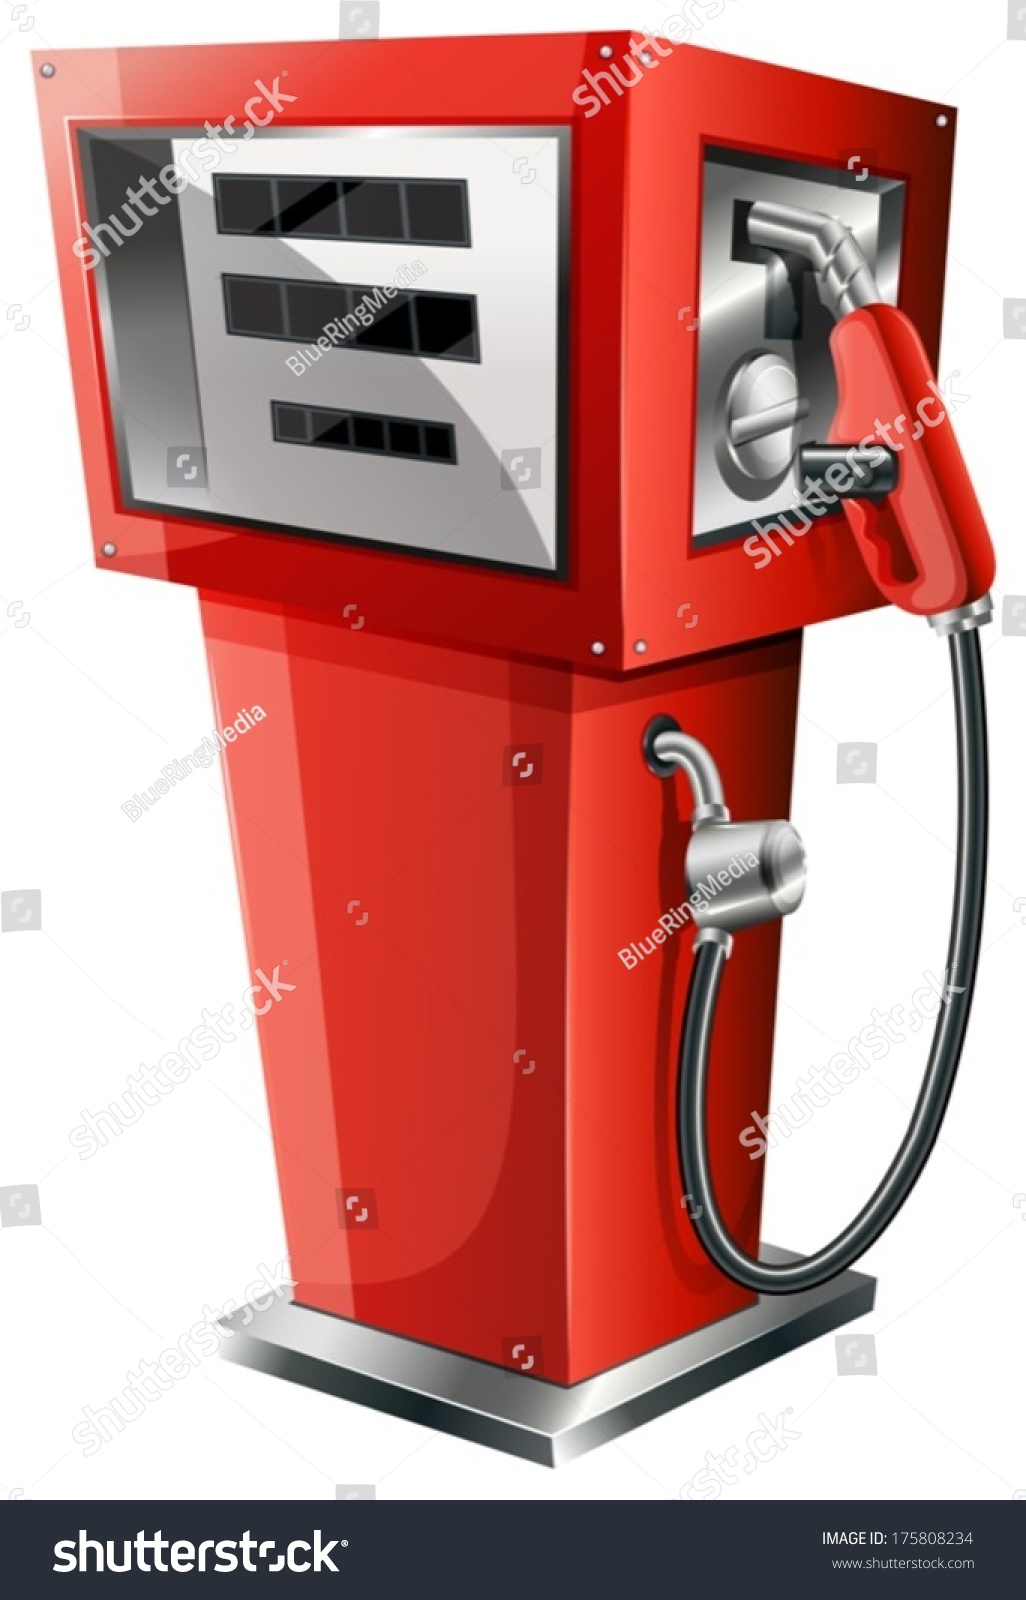 SVG of Illustration of a red petrol pump on a white background svg